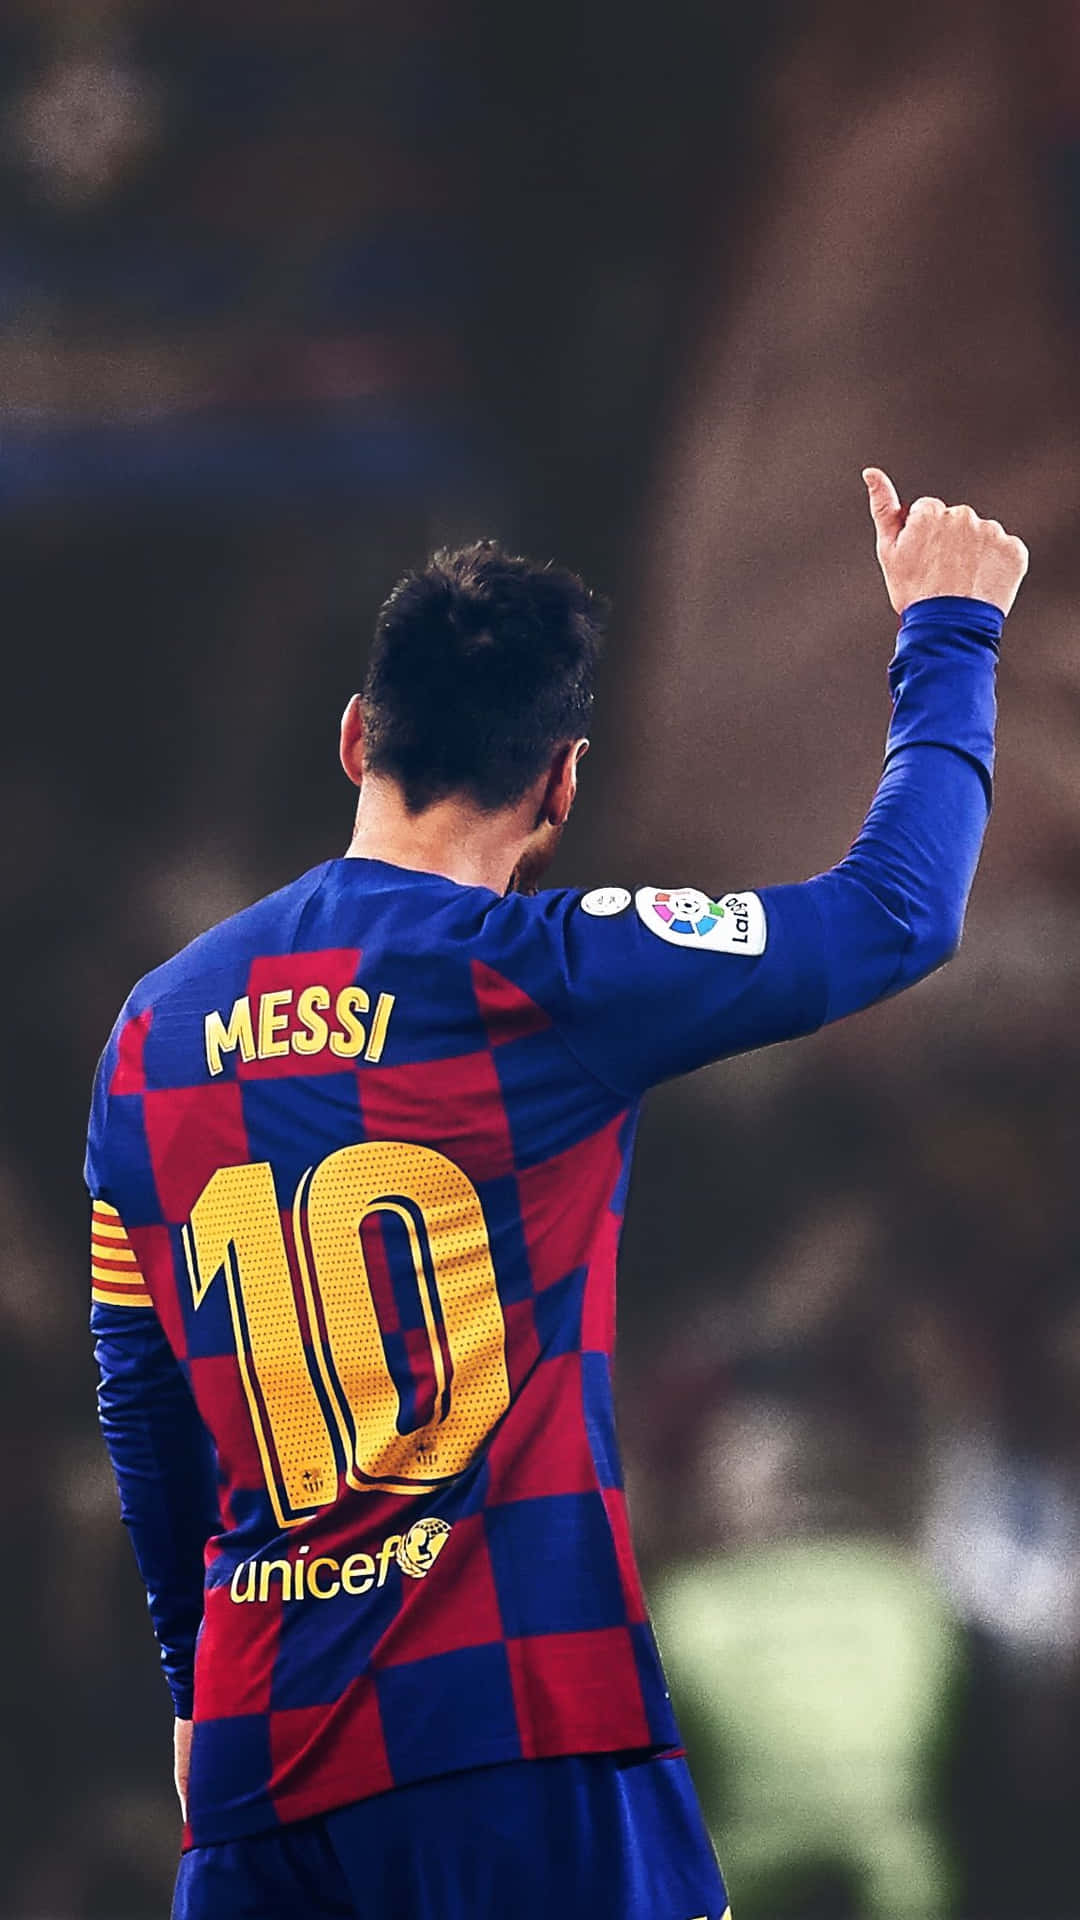 Image 'lionel Messi, King Of Football' Background